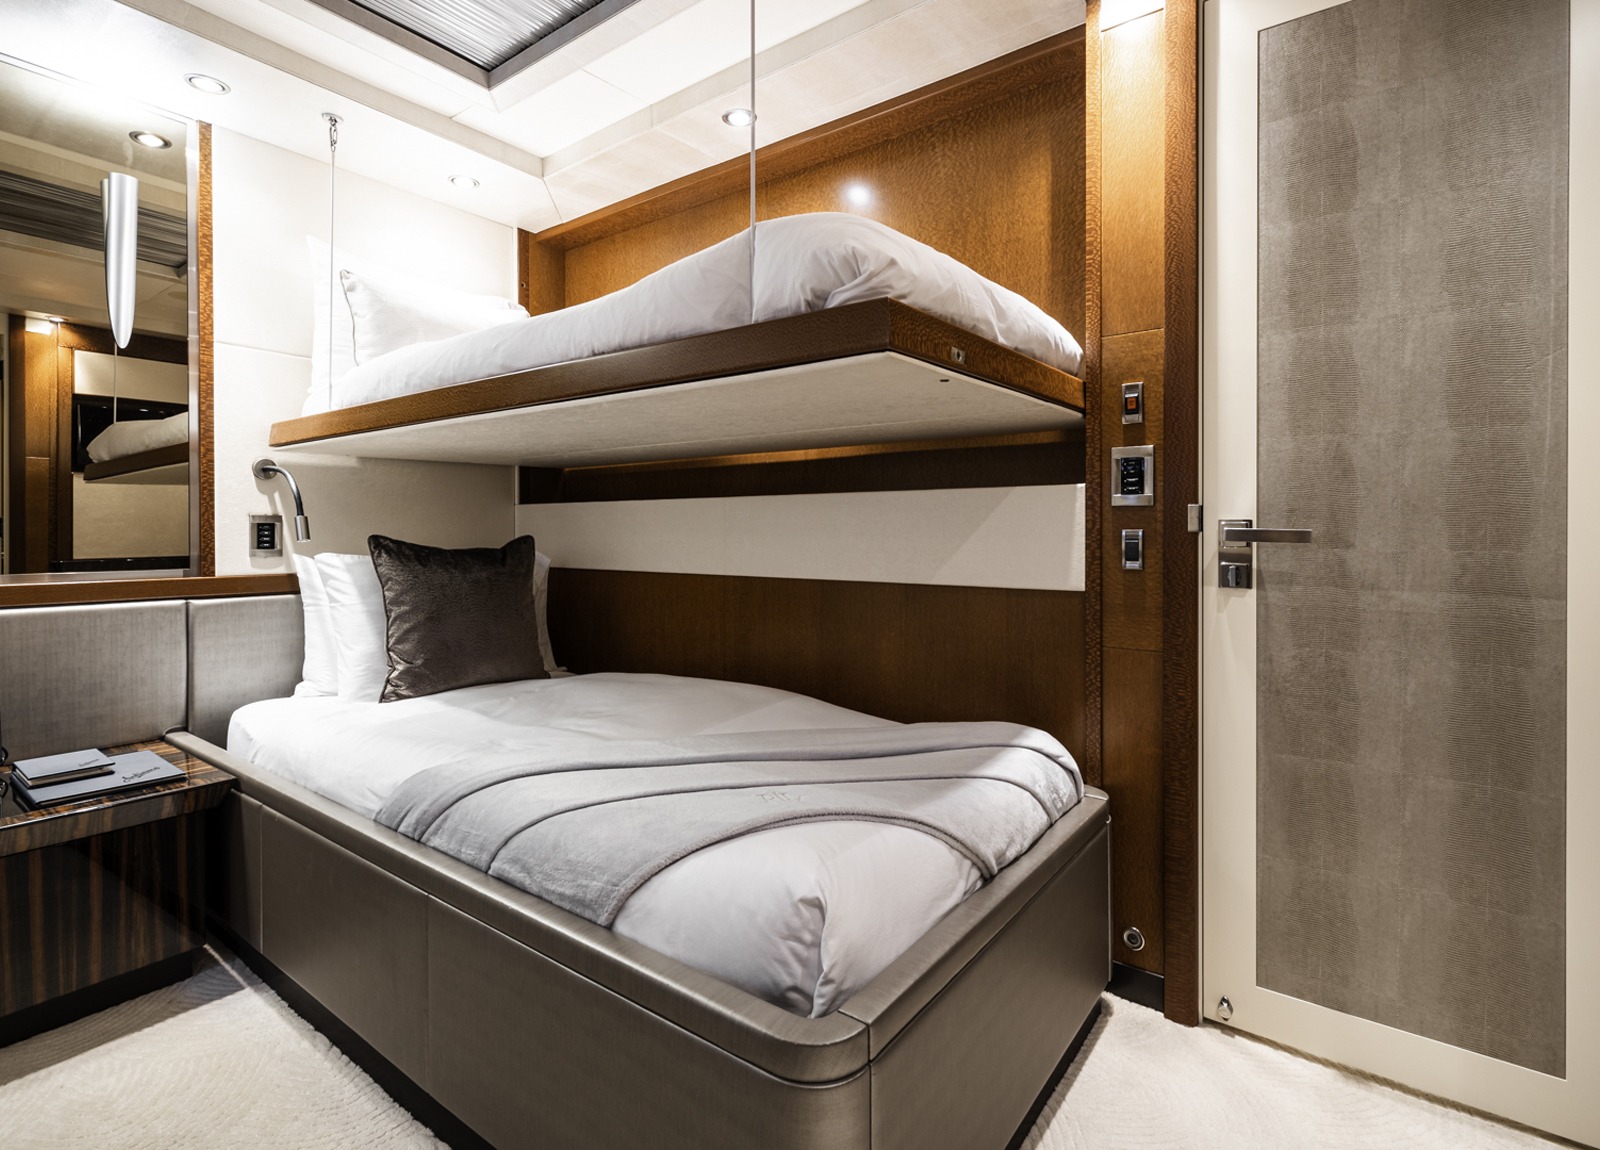 two bed cabin luxury yacht parker johnson 150